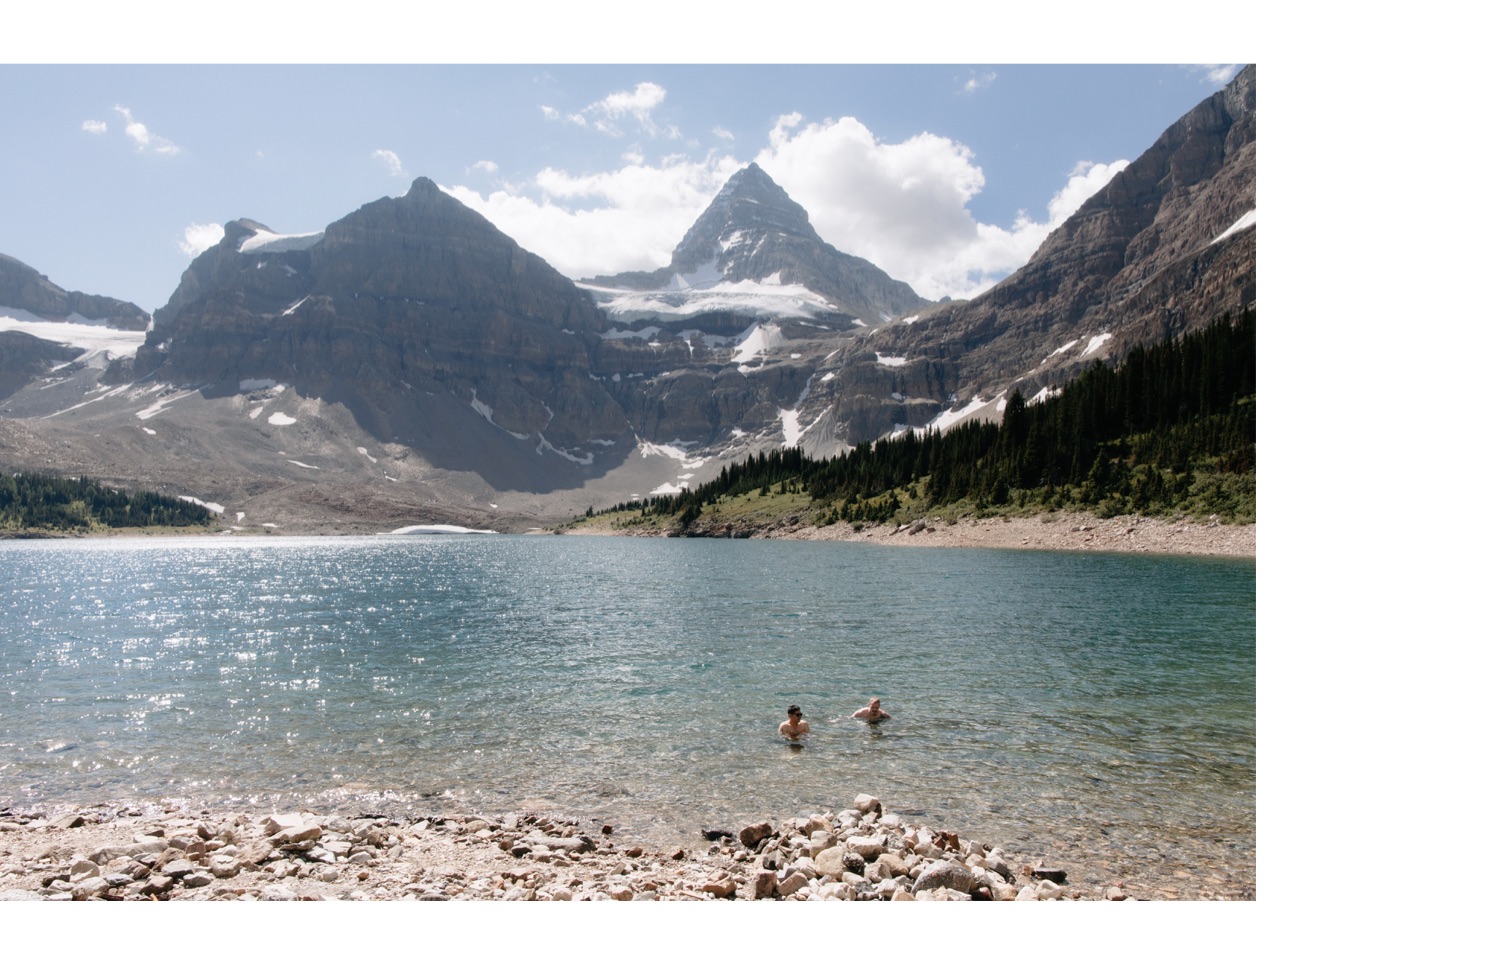 Two men swimming in Lake Magog near the backcountry campground beneath Mount Assiniboine